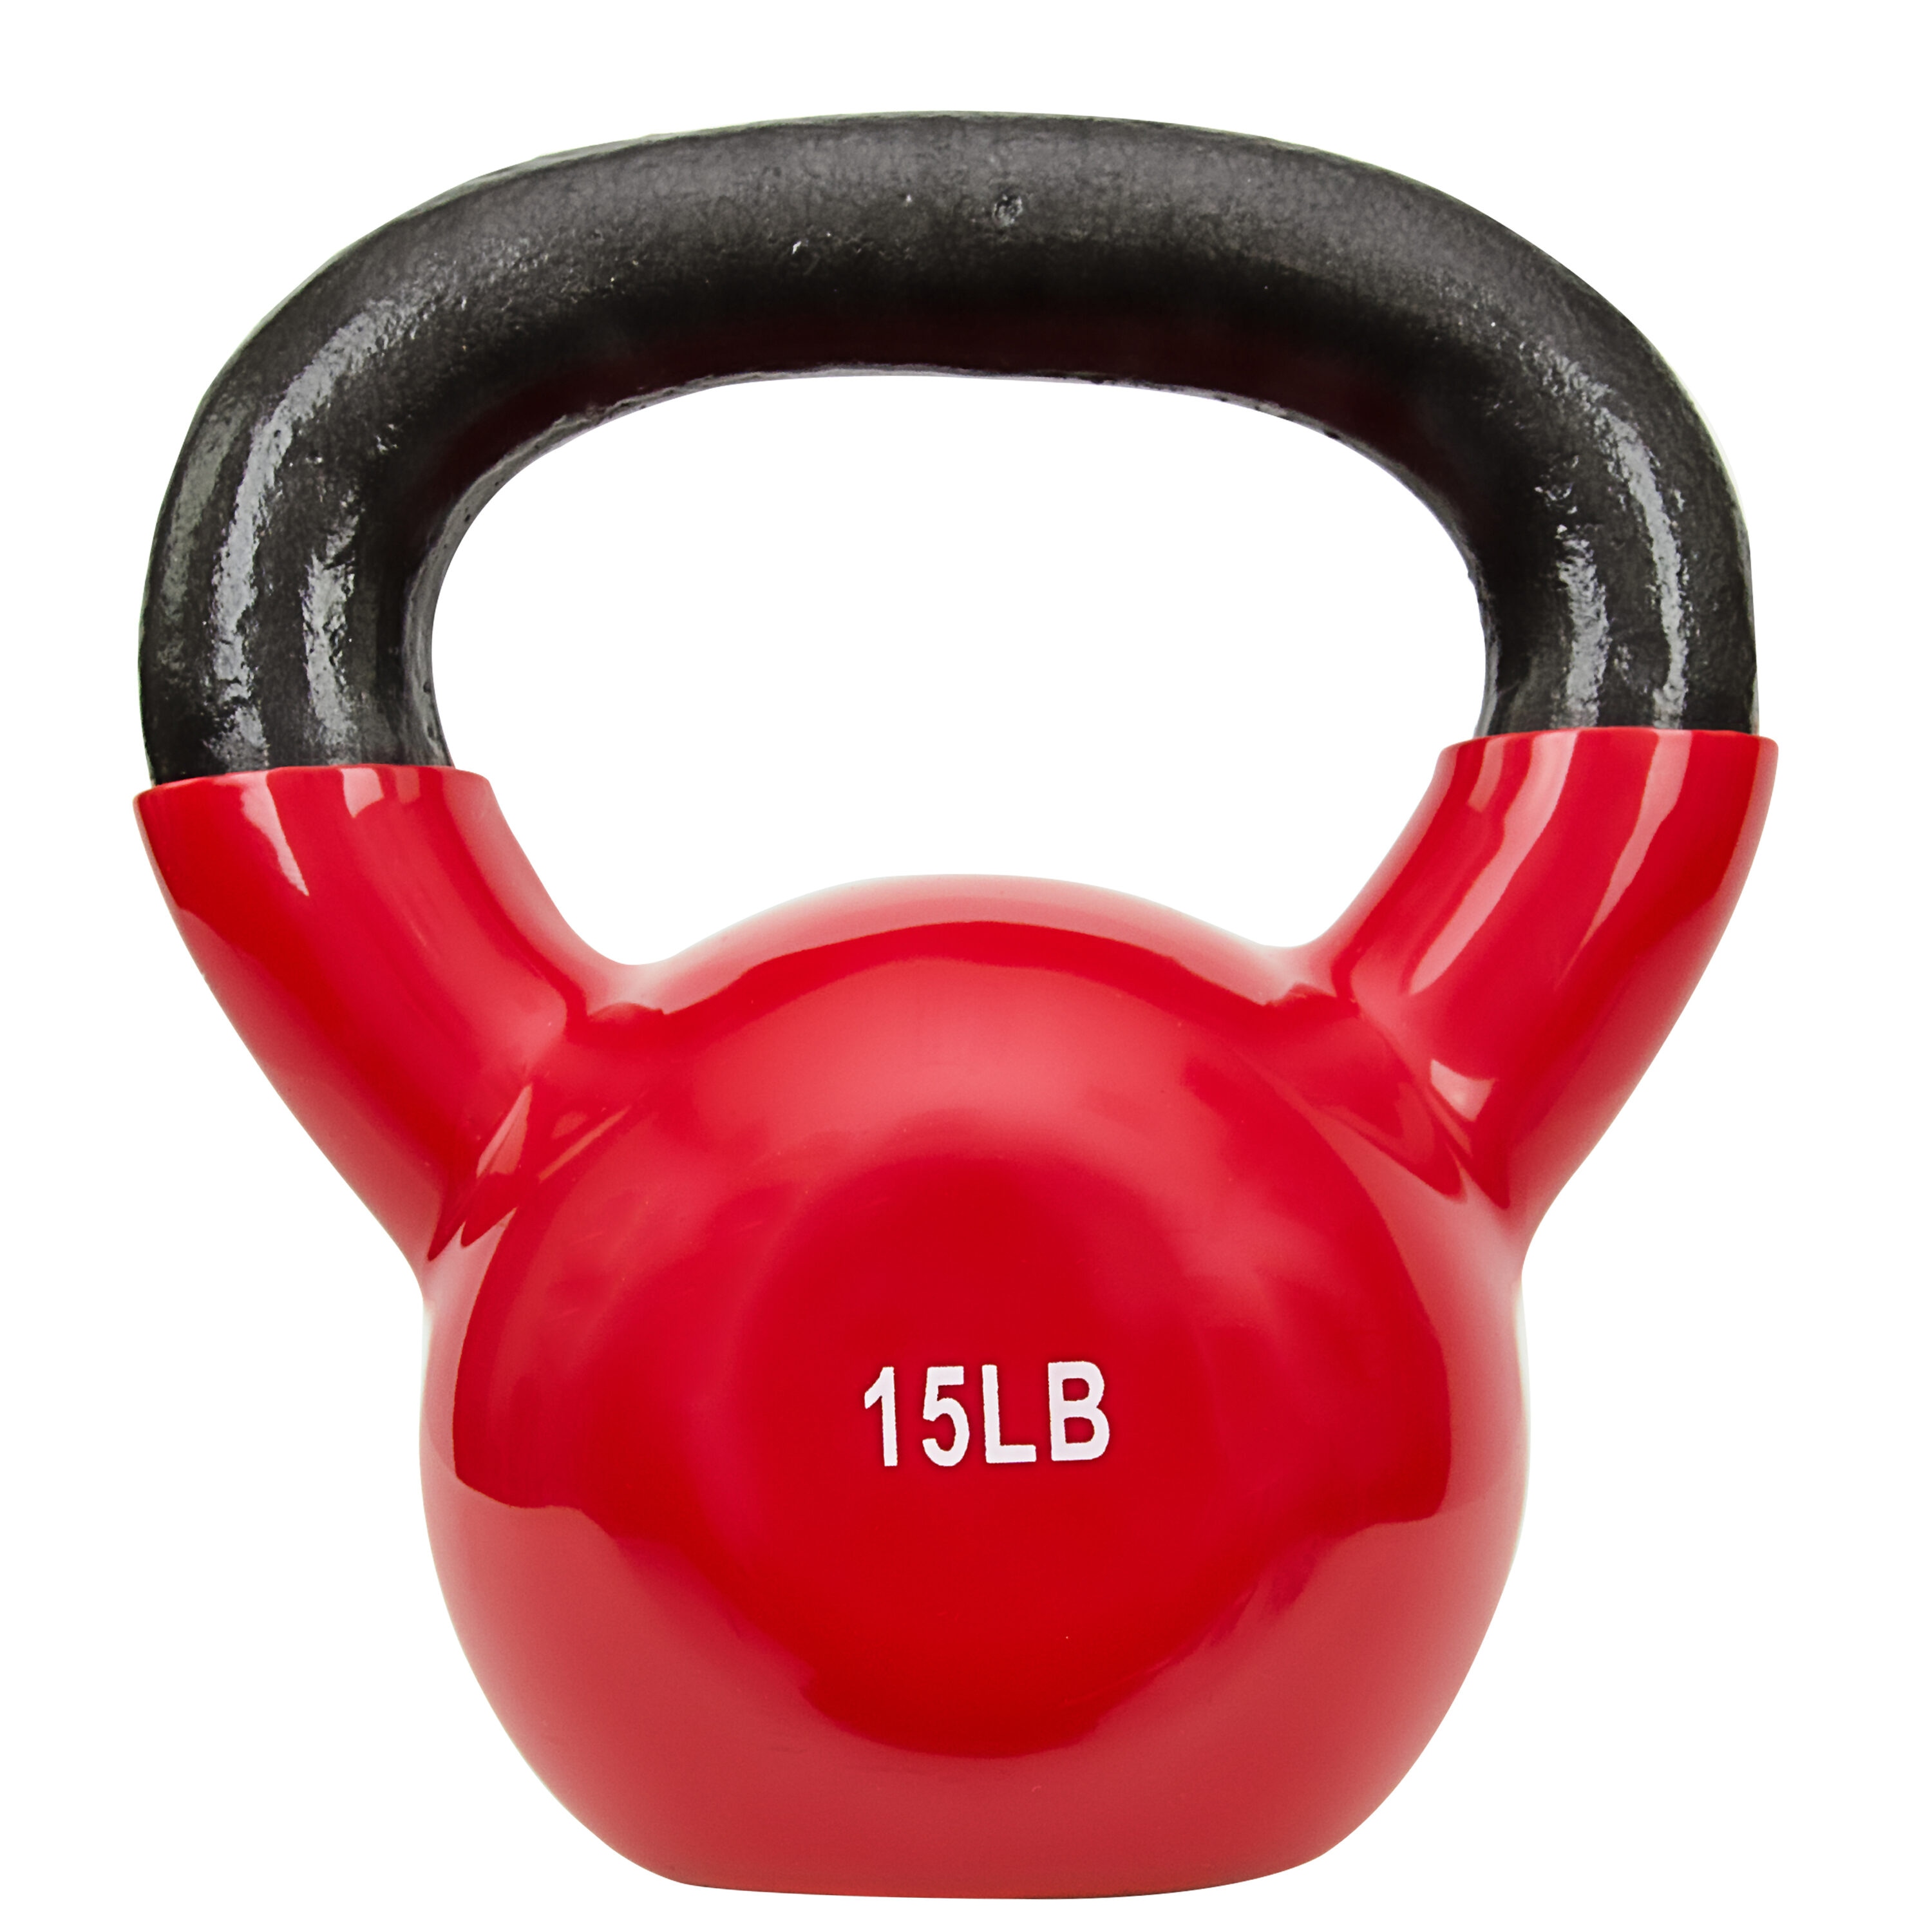 Sunny Health & Fitness Vinyl-Coated 15-Pound Kettlebell Weight, Red